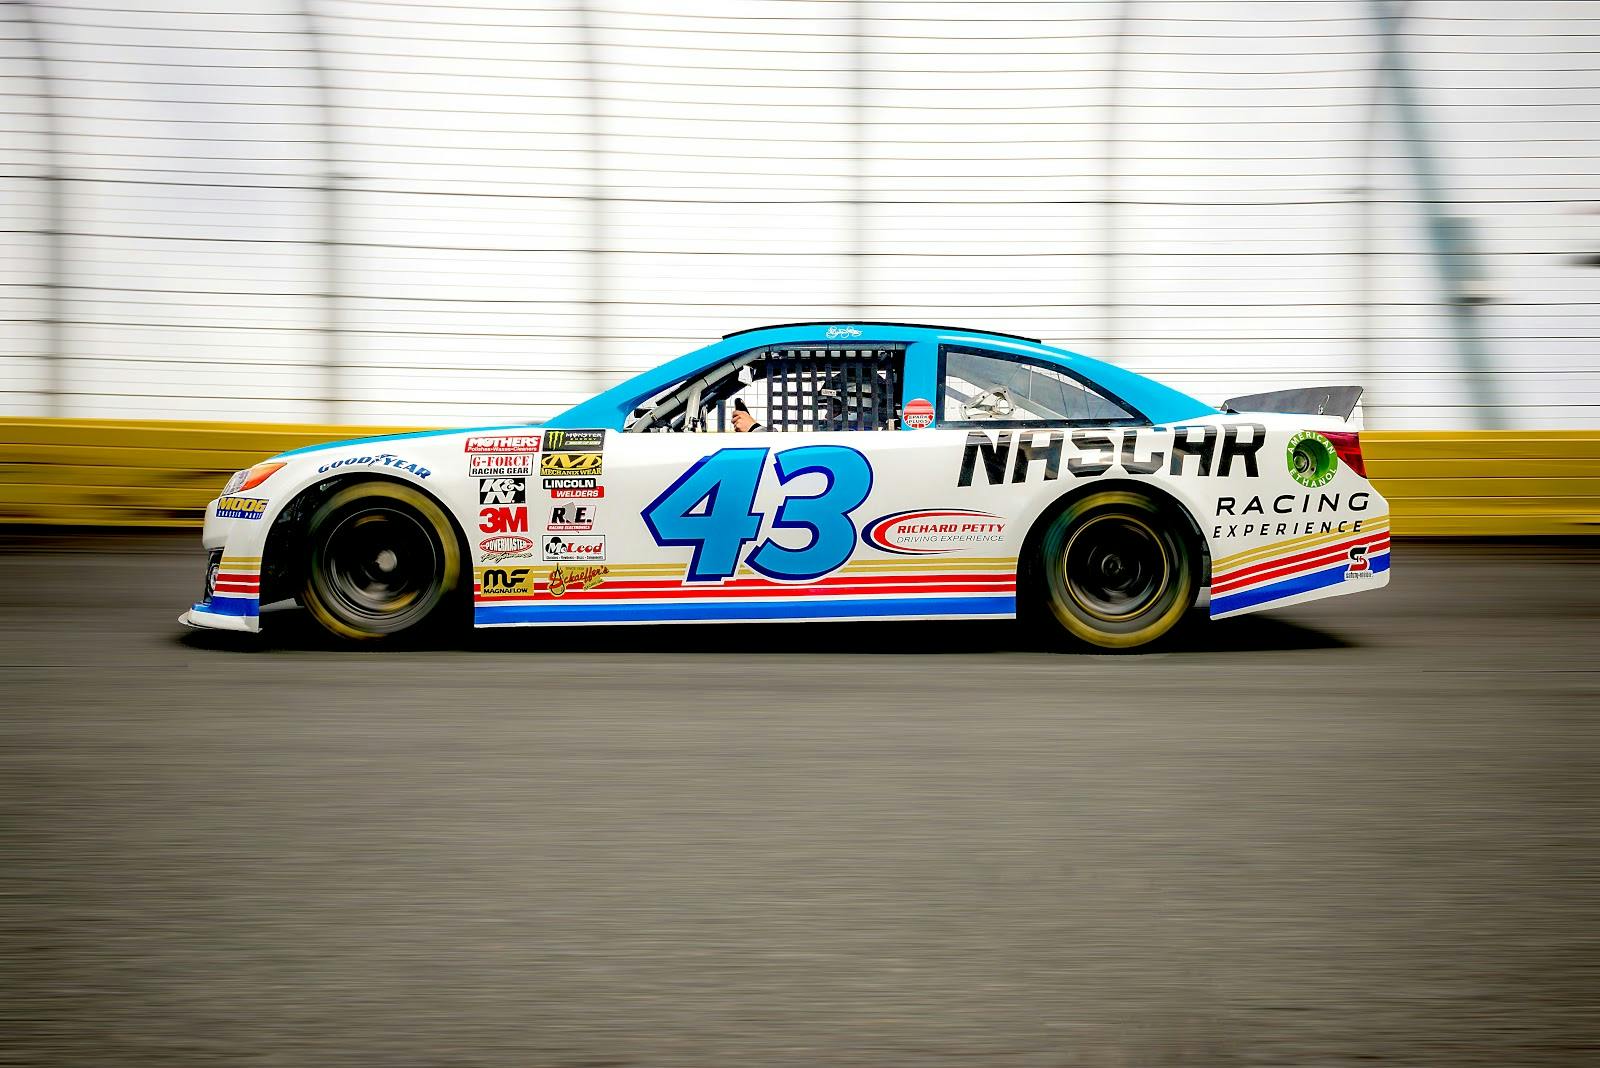 Image - NASCAR Racing Experience and Richard Petty Driving Experience